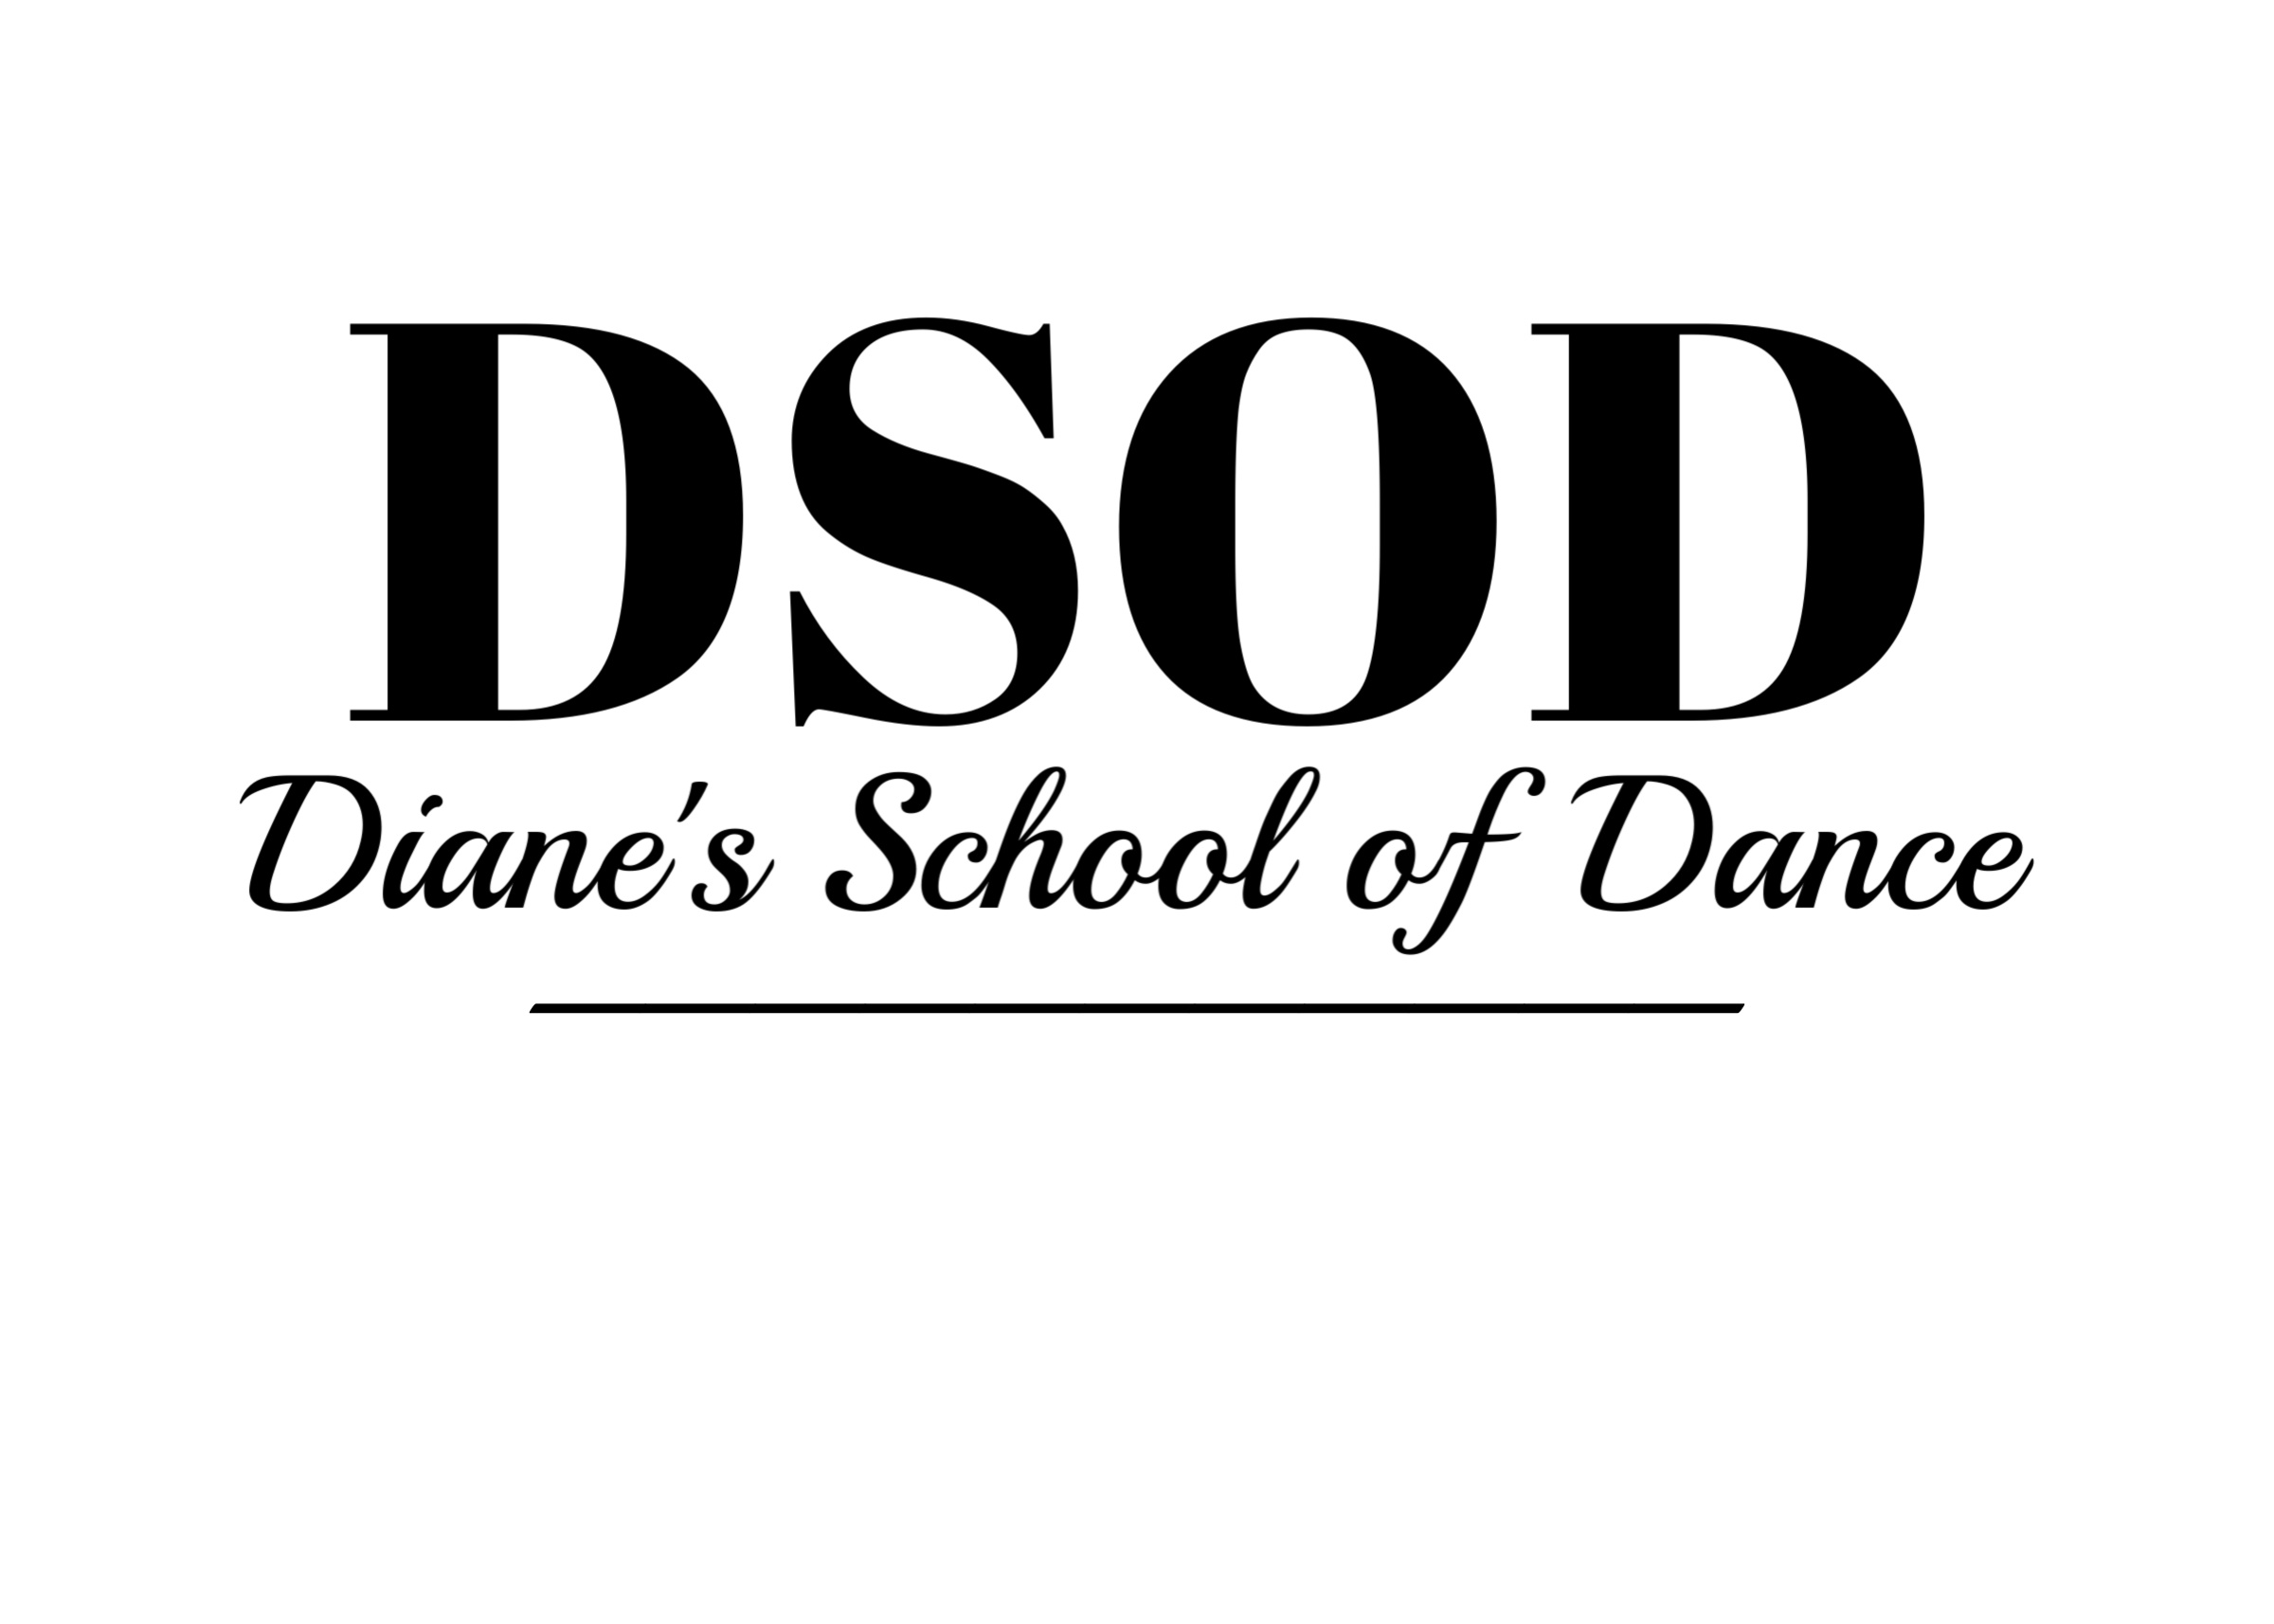 Contact Us by Diane's School of Dance in Kansas City Missouri